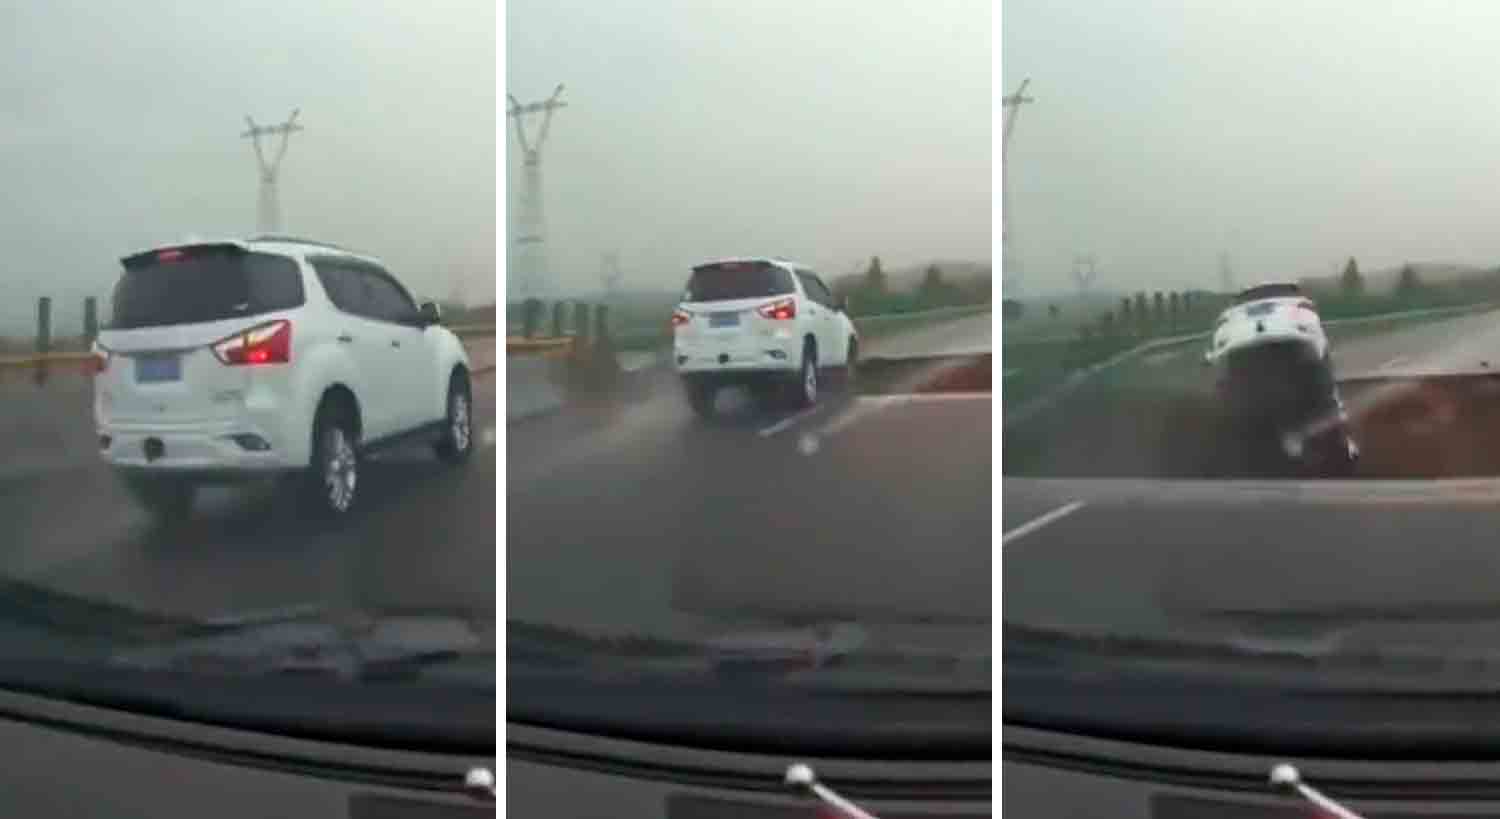 Video shows car being swallowed by a hole in the road. Reproduction Twitter: @Top_Disaster